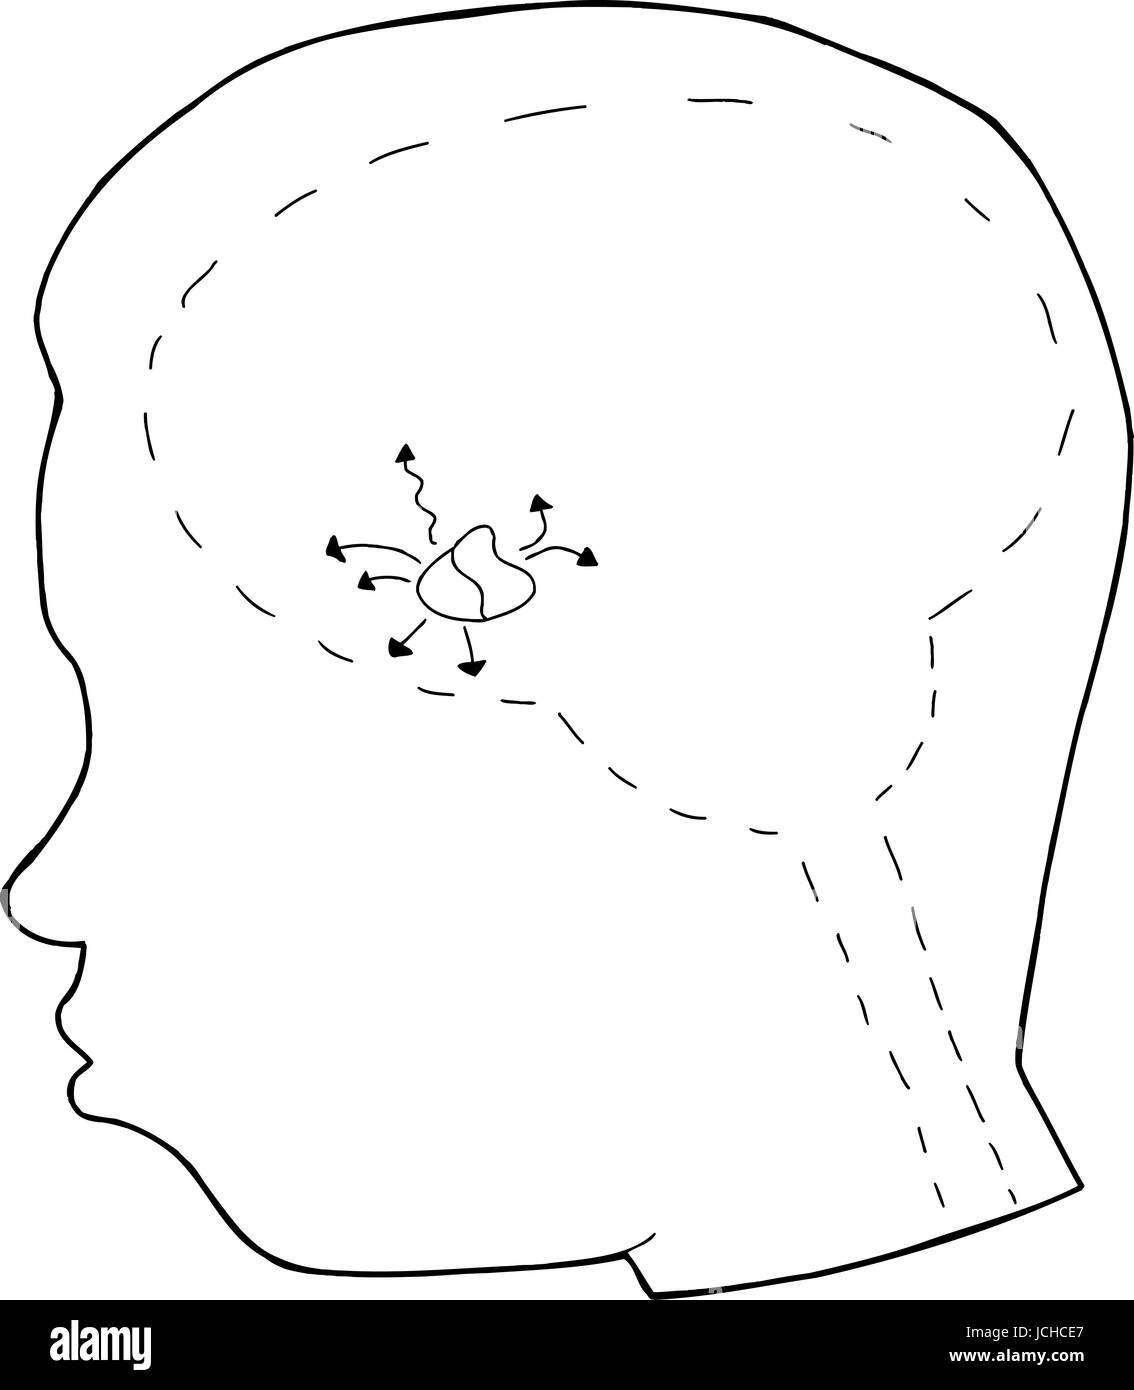 Outline of human head with pituitary gland Stock Photo